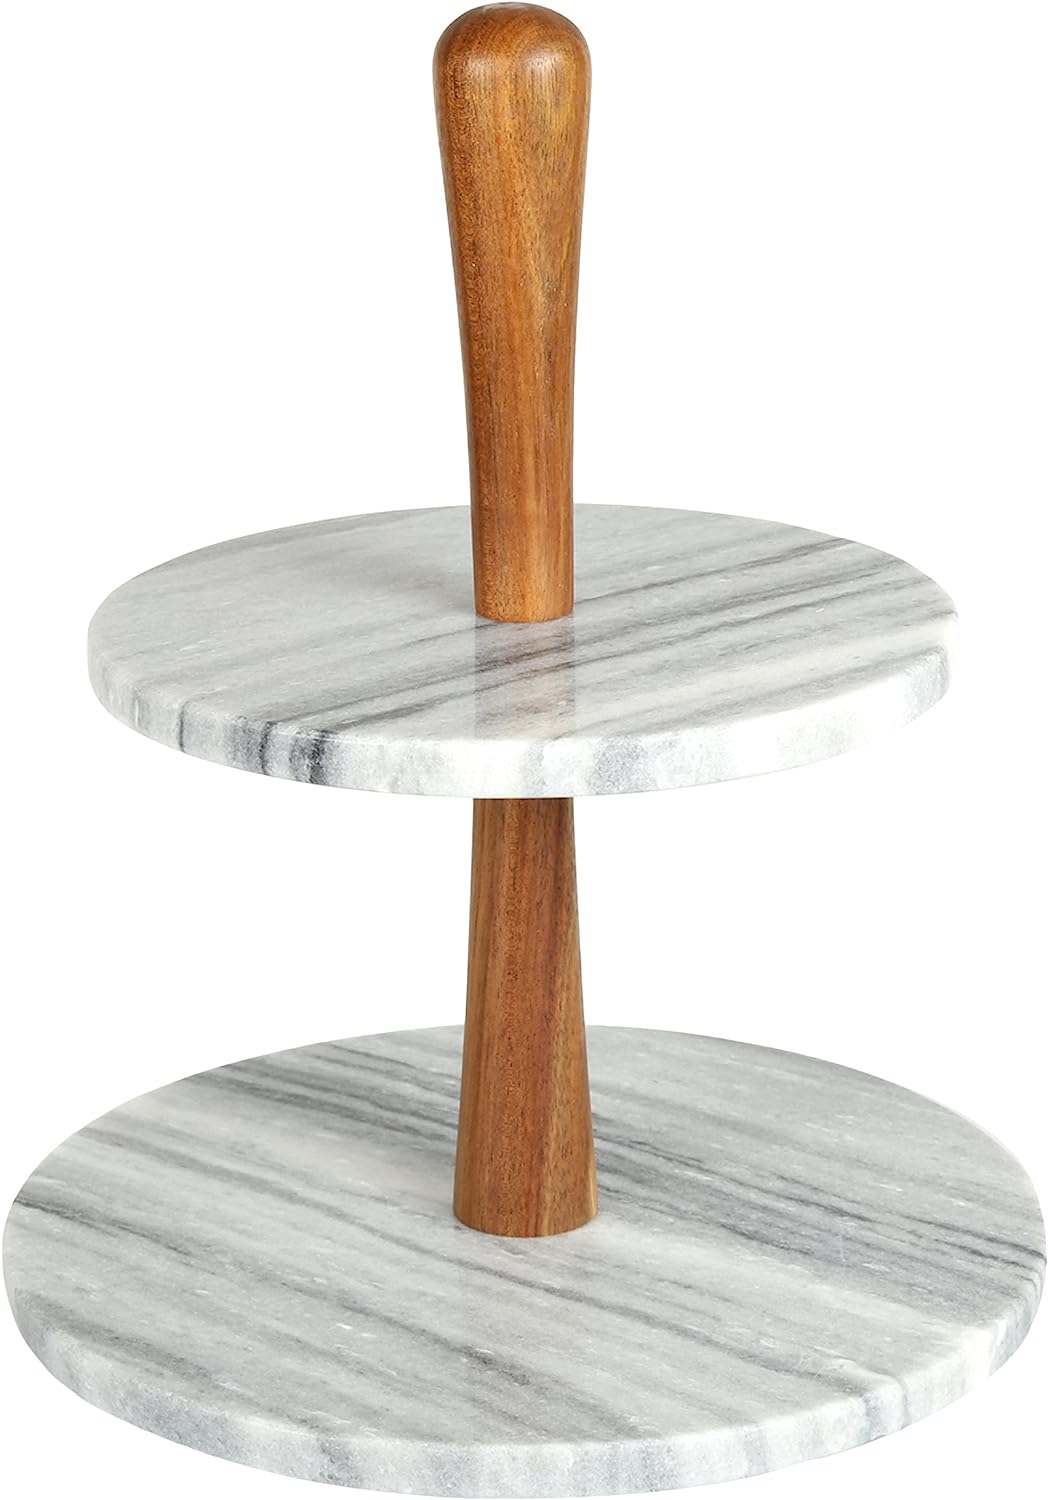 2-Tier Marble Cake Stand | Hand-Crafted | Natural Stone | Acacia Wood